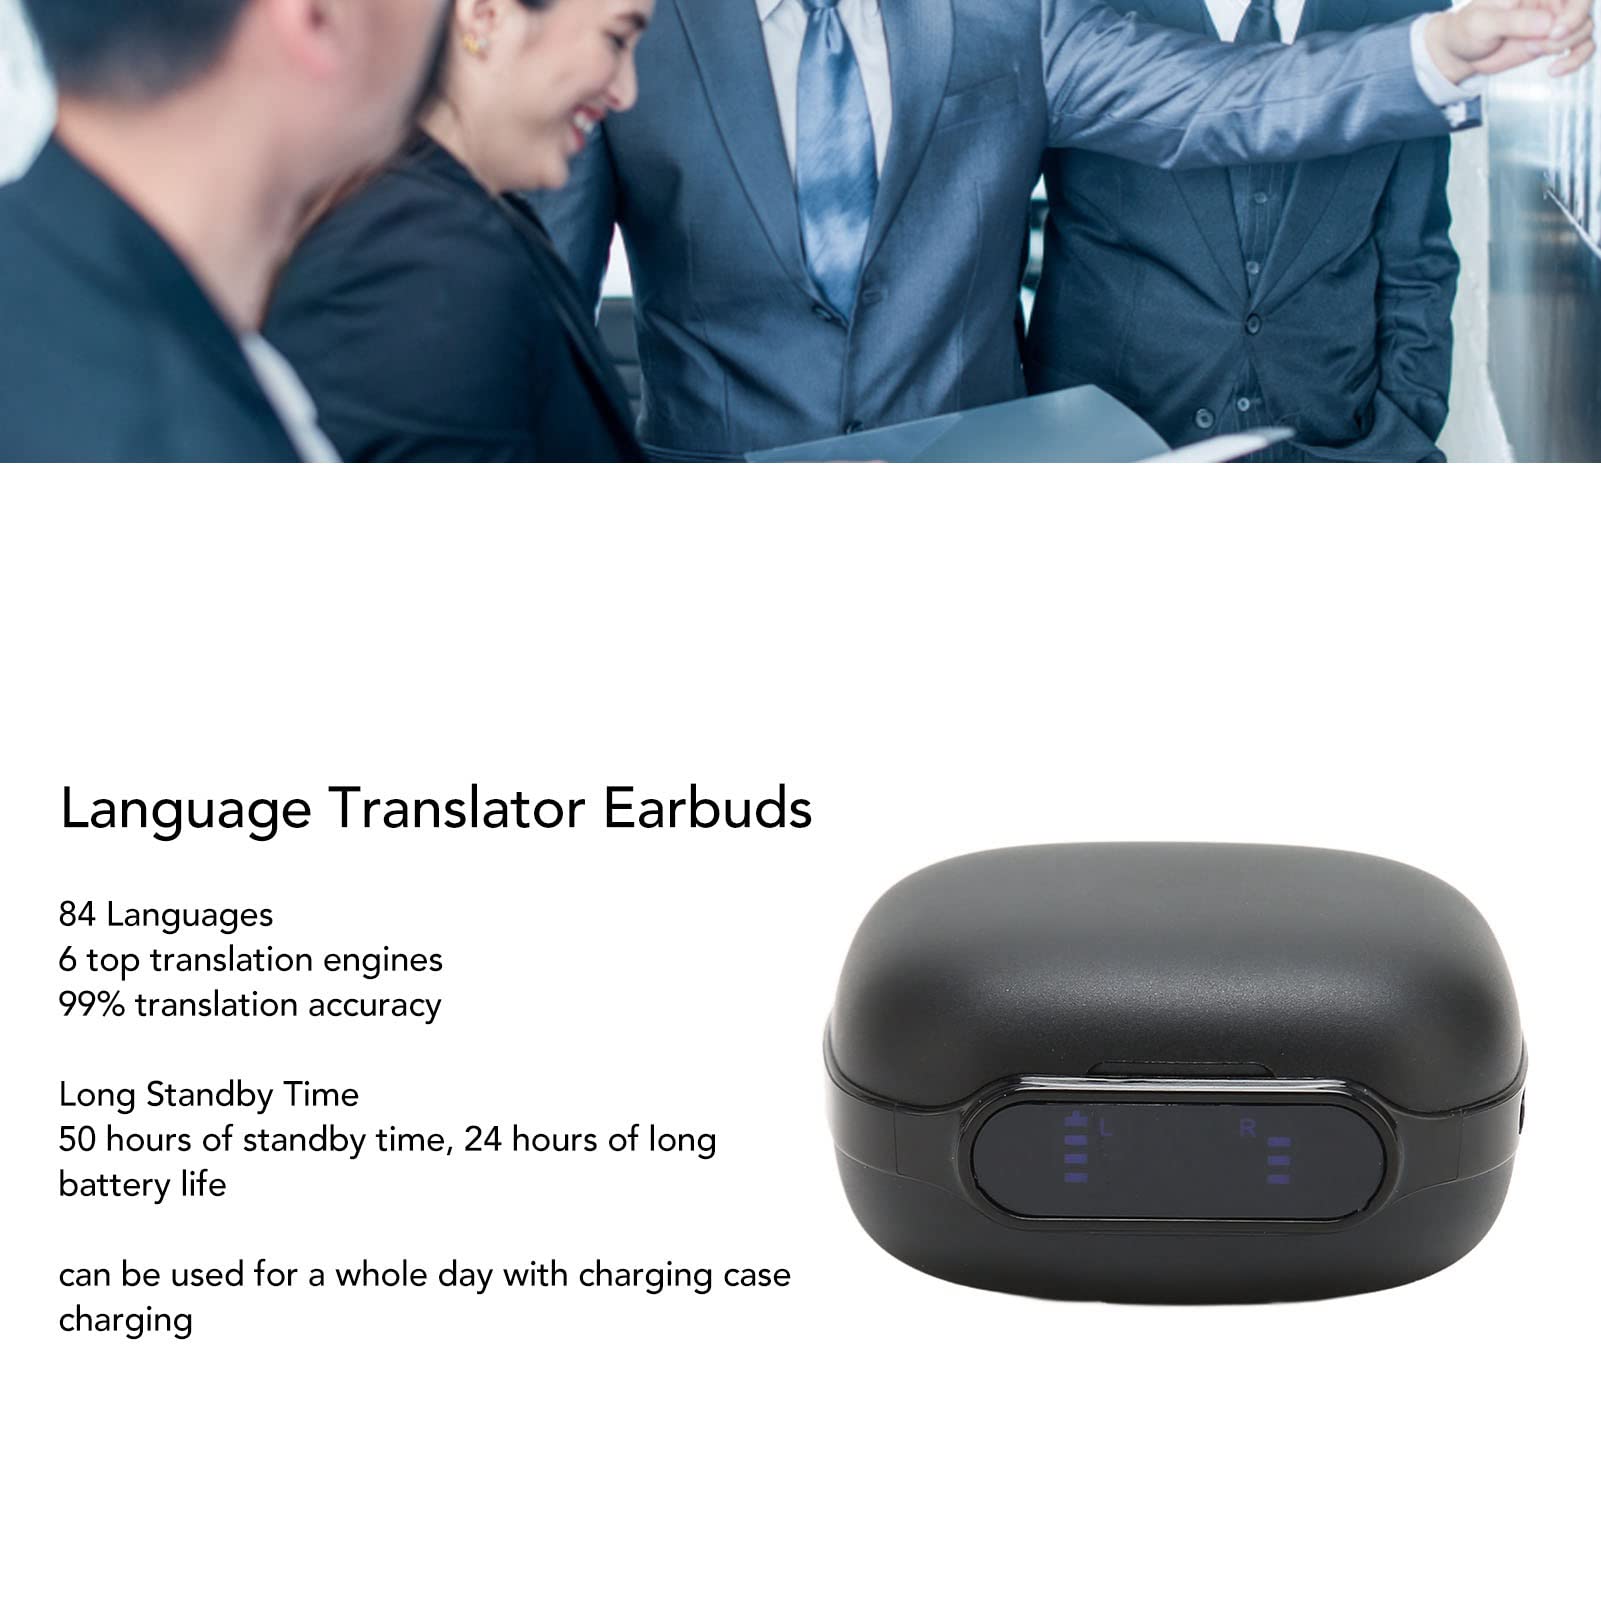 Language Translator Earbuds, Wireless Bluetooth Translator Earbuds 84 Languages Smart Voice Translator Earbuds with Speakers Two Way High Accuracy Noise Reduction Translator Device (Black)